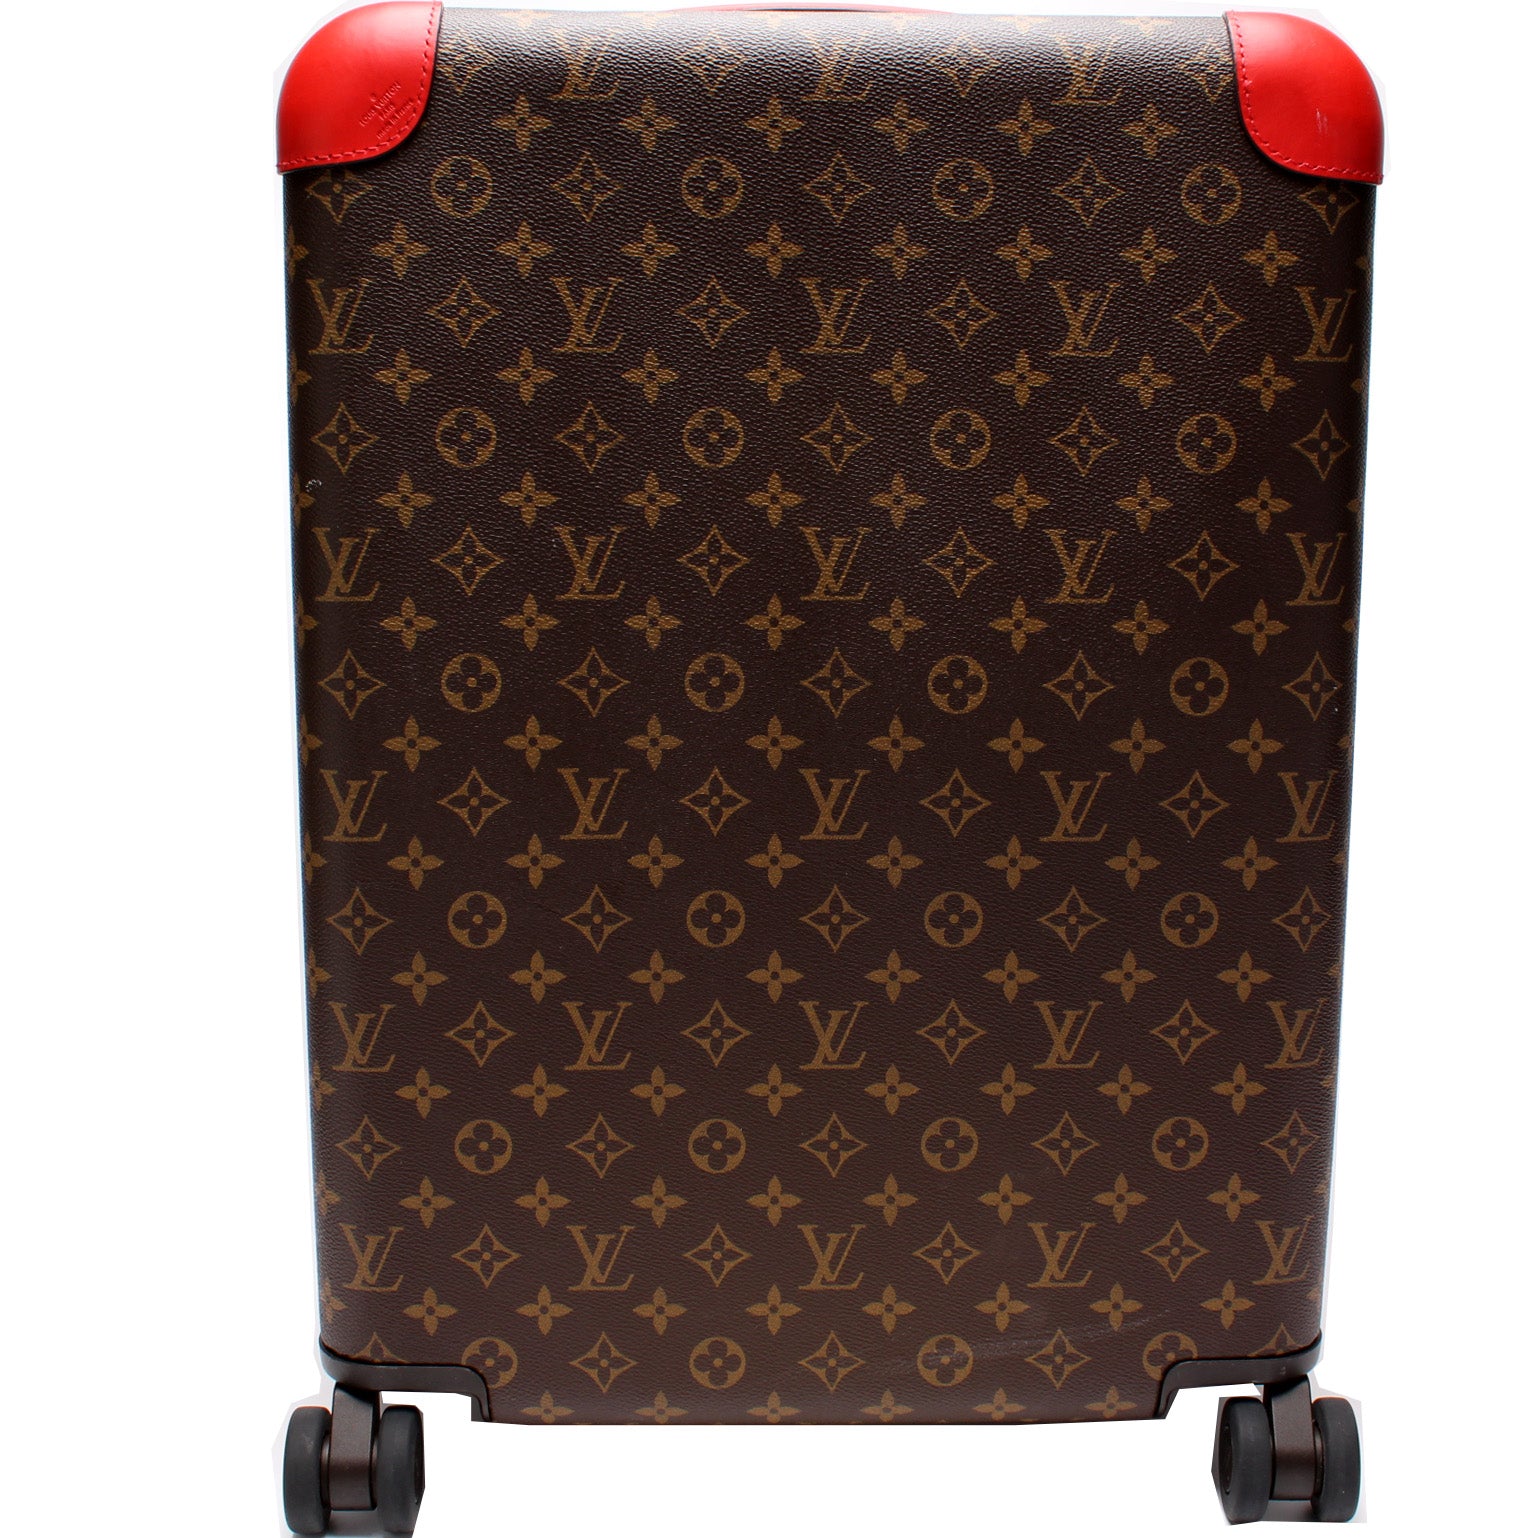 Products By Louis Vuitton: Horizon 55